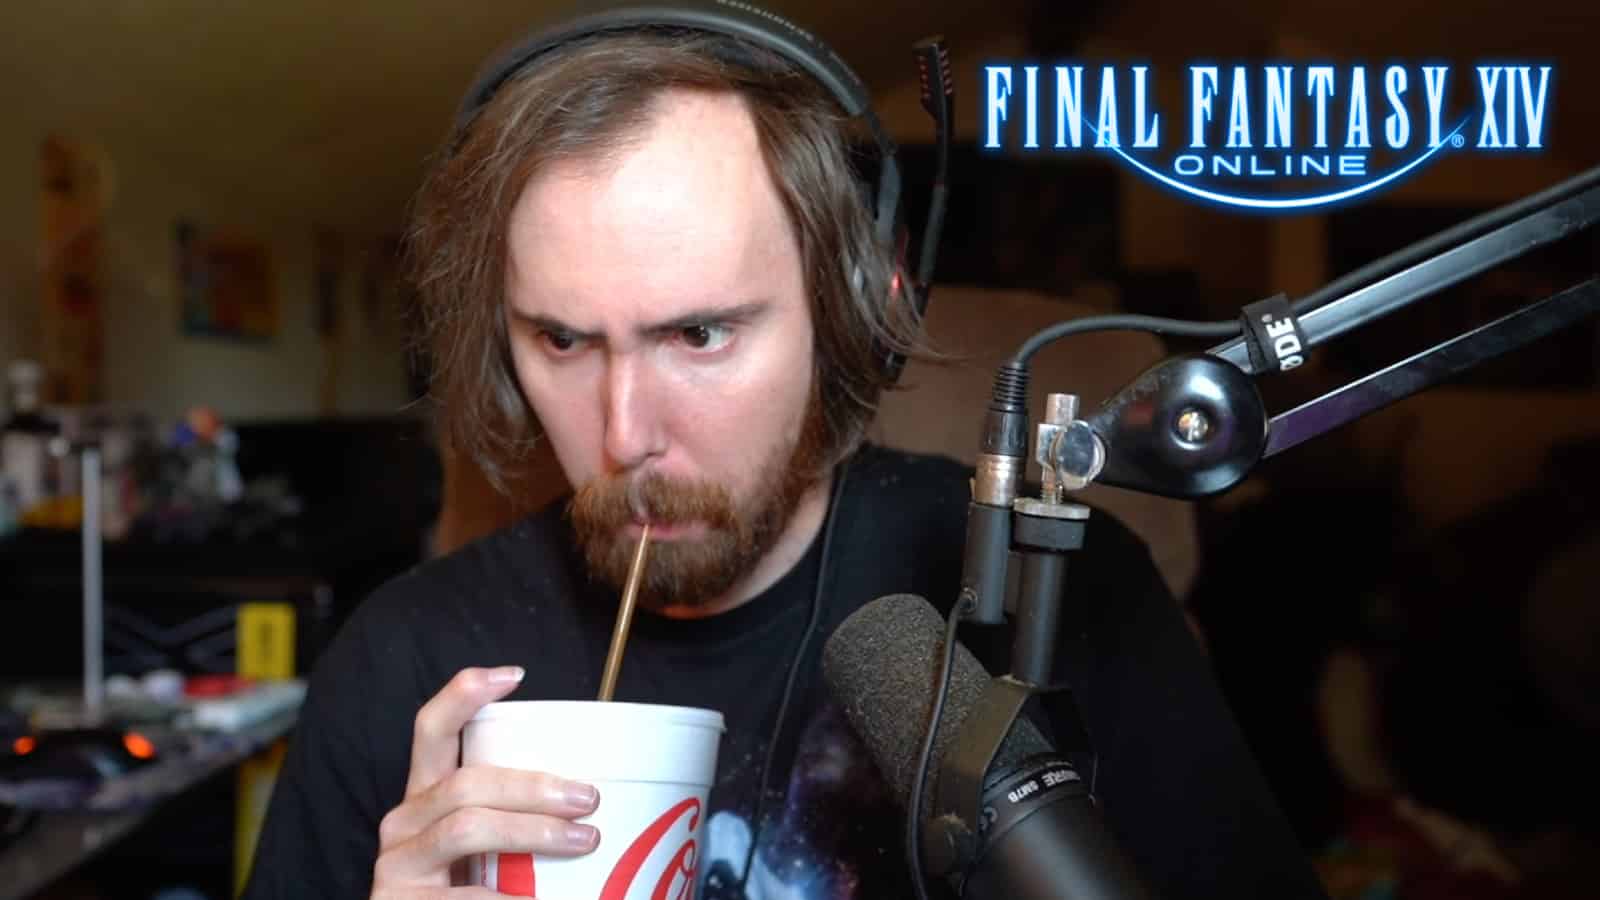 Asmongold bets 10,000 subs in response to FFXIV challenge